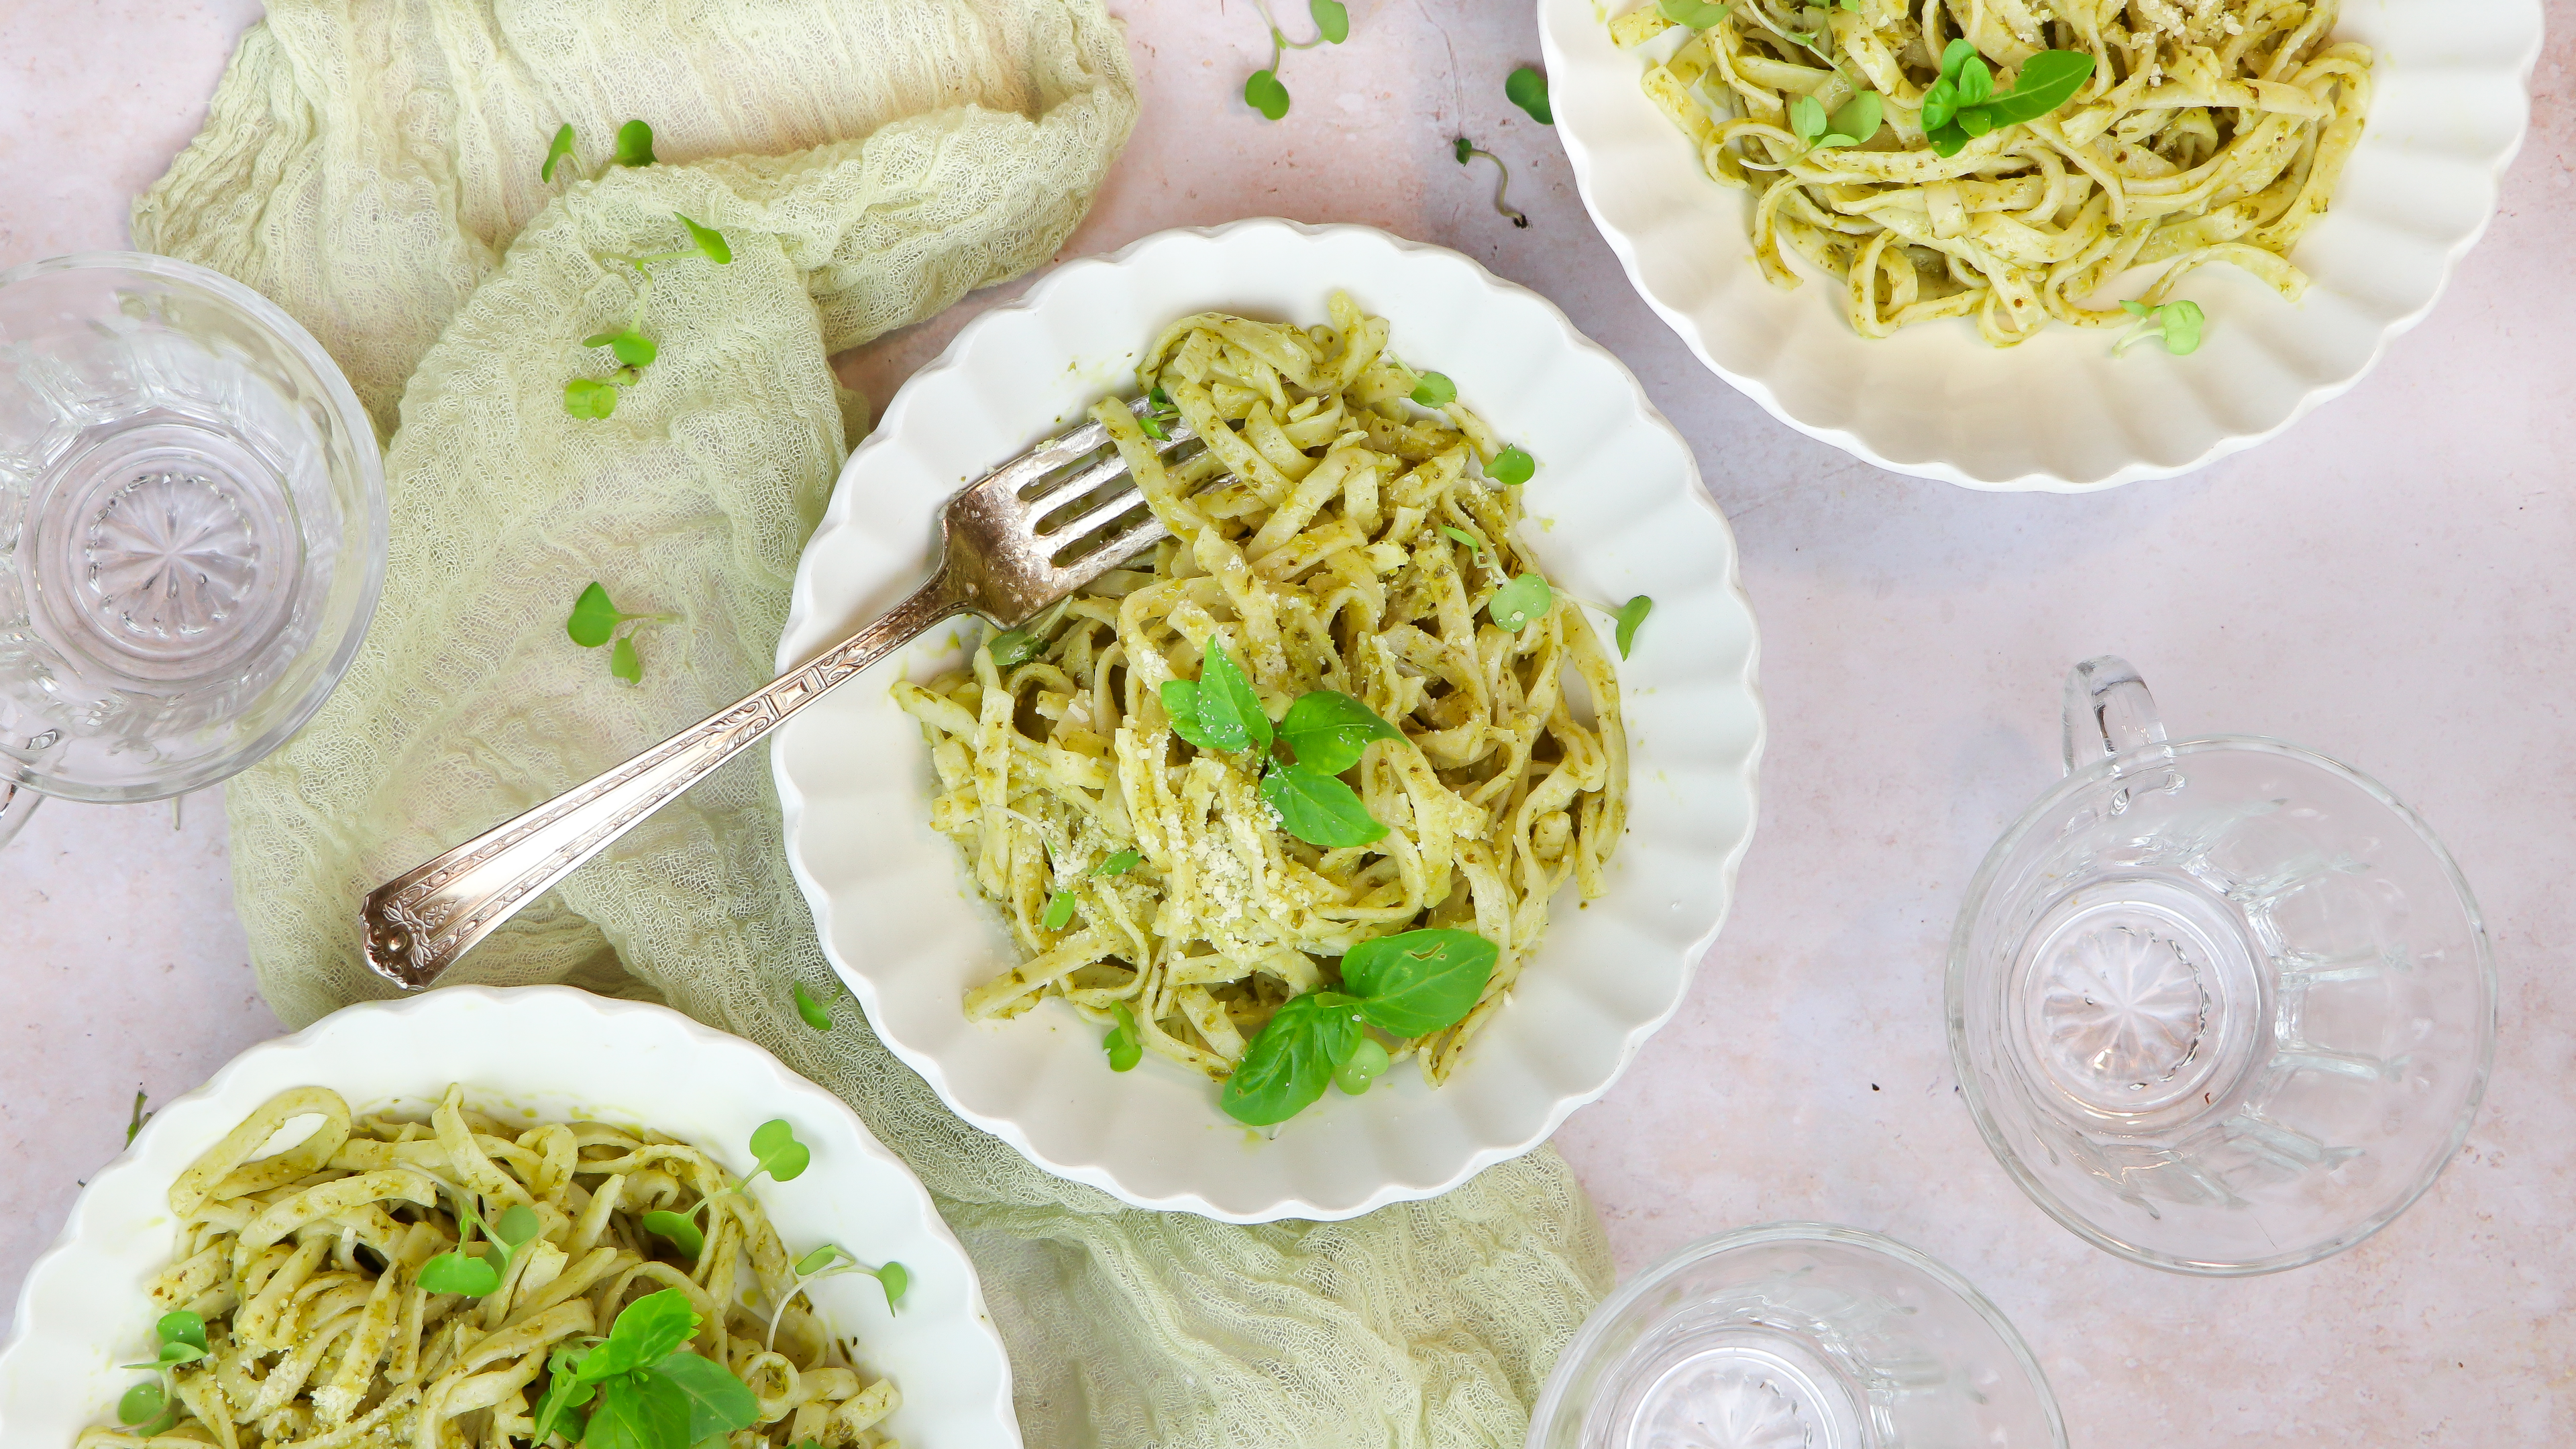 Pesto Pasta topped with microgreens and basil